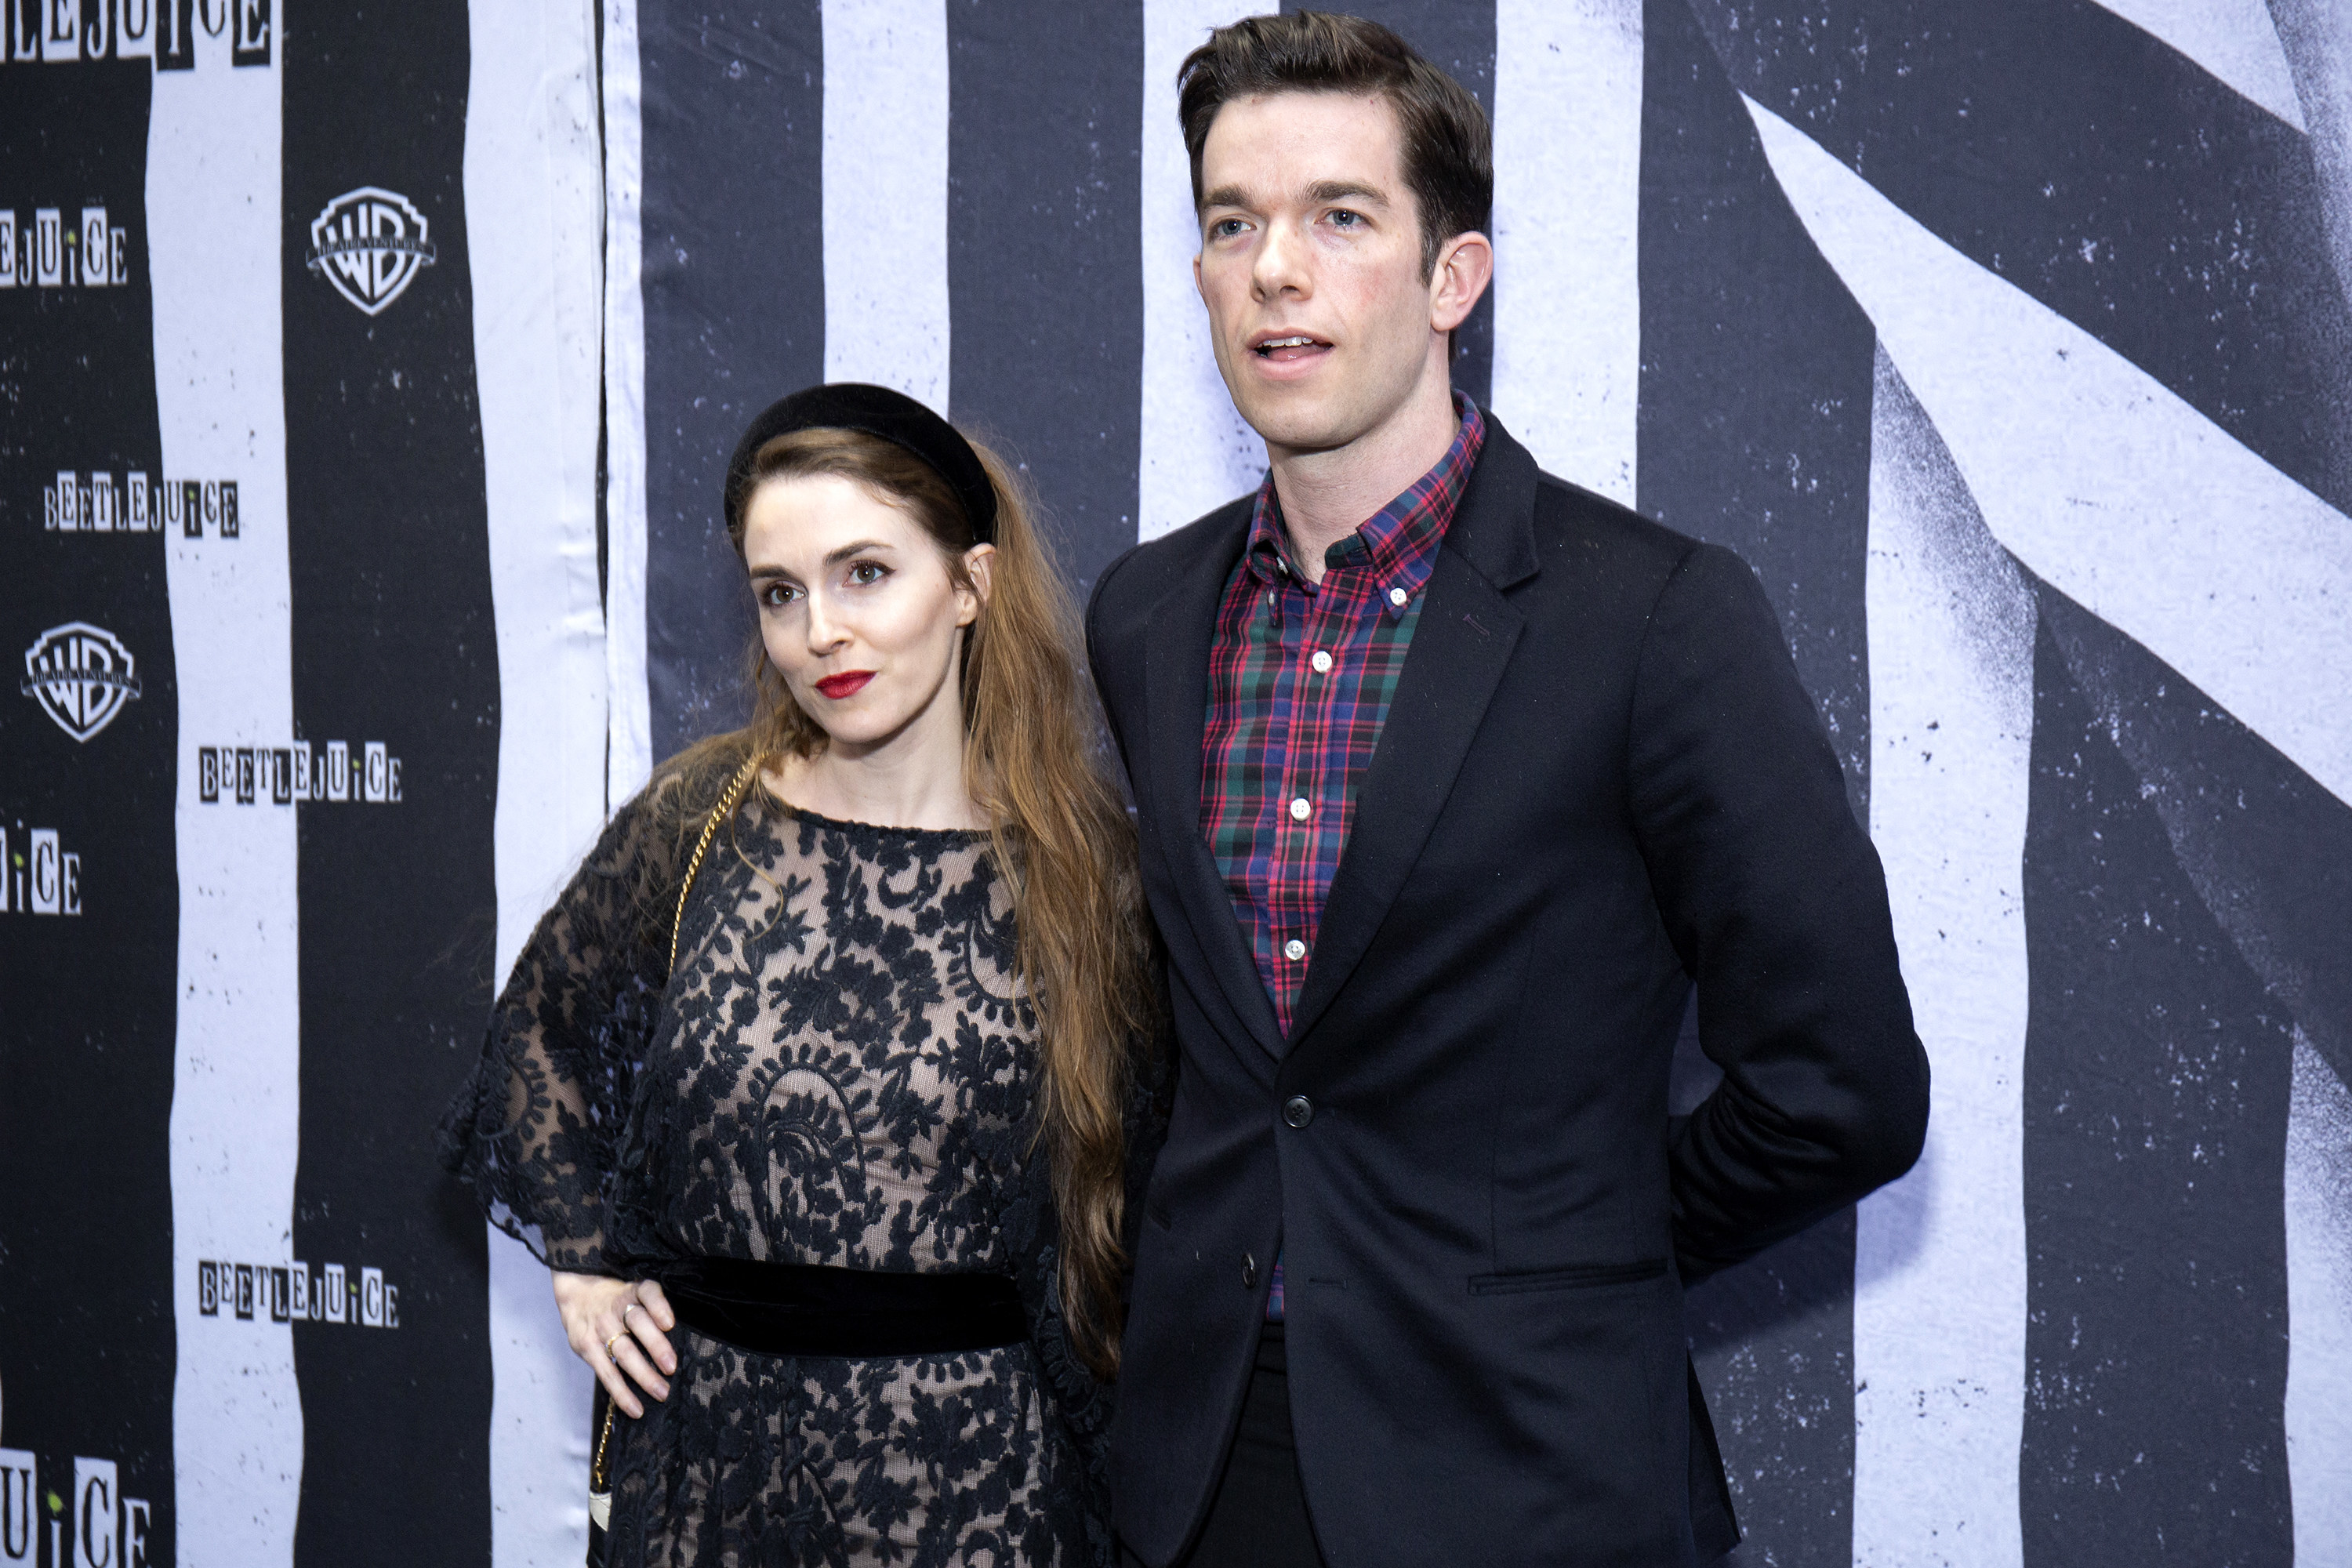 Close-up of John and Anna at a media event